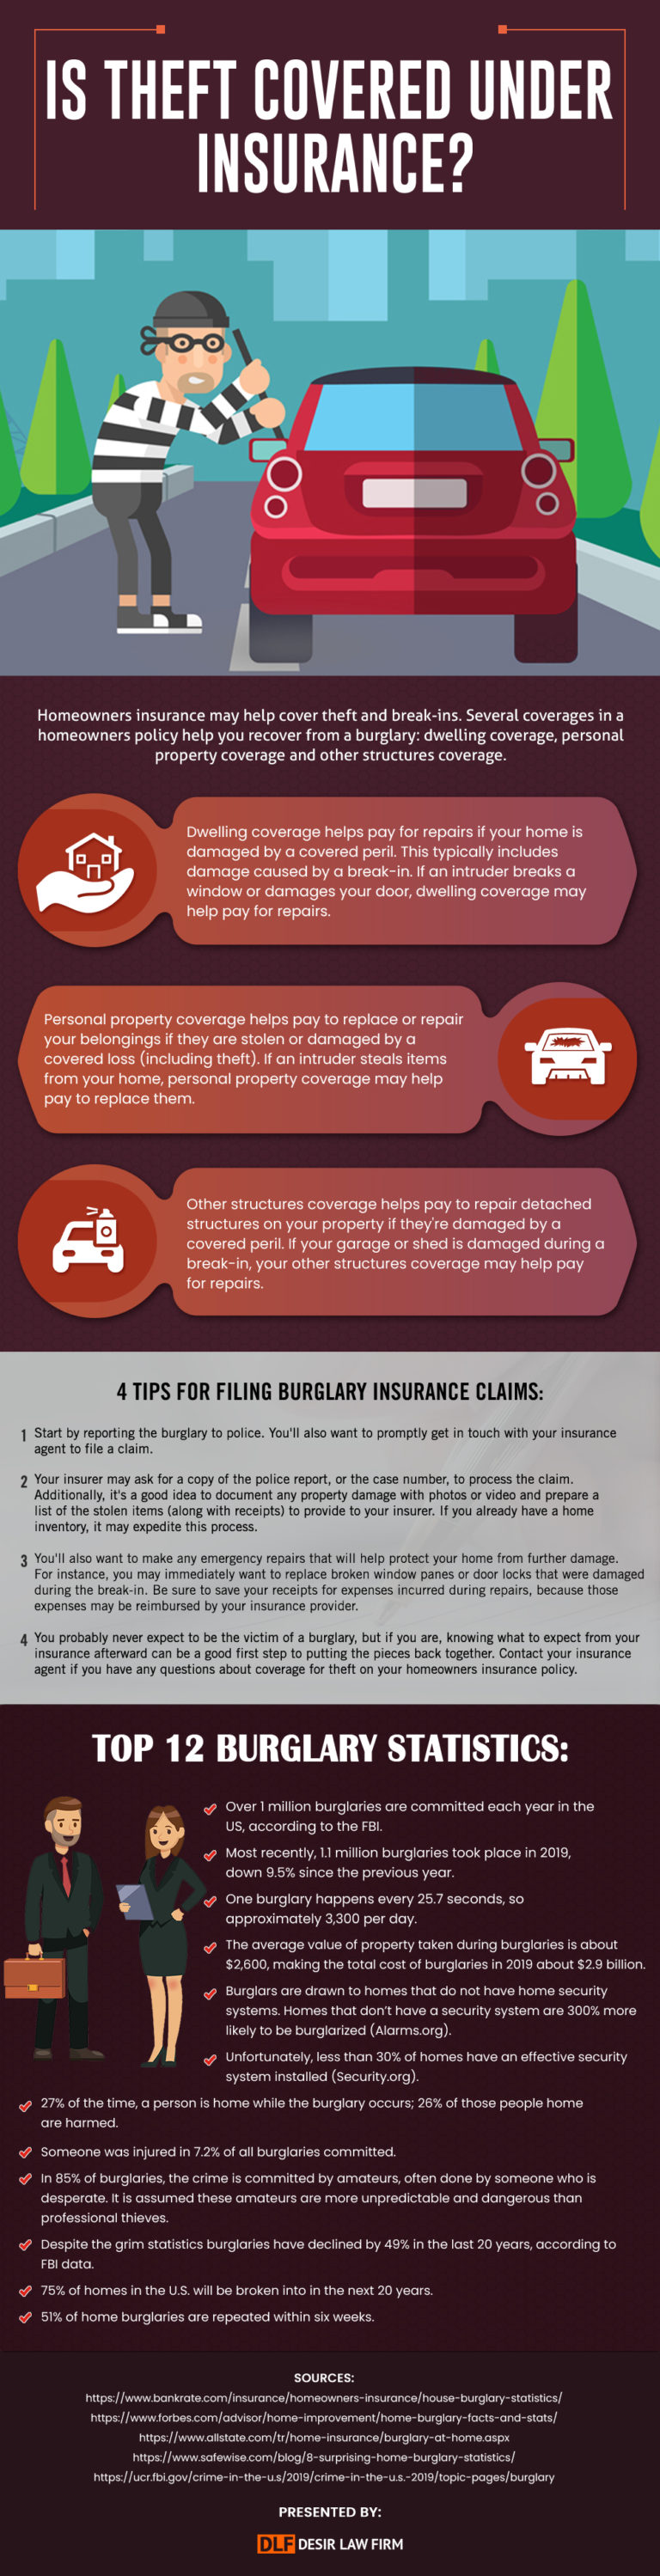 infographic-is-theft-covered-under-insurance-desir-law-firm